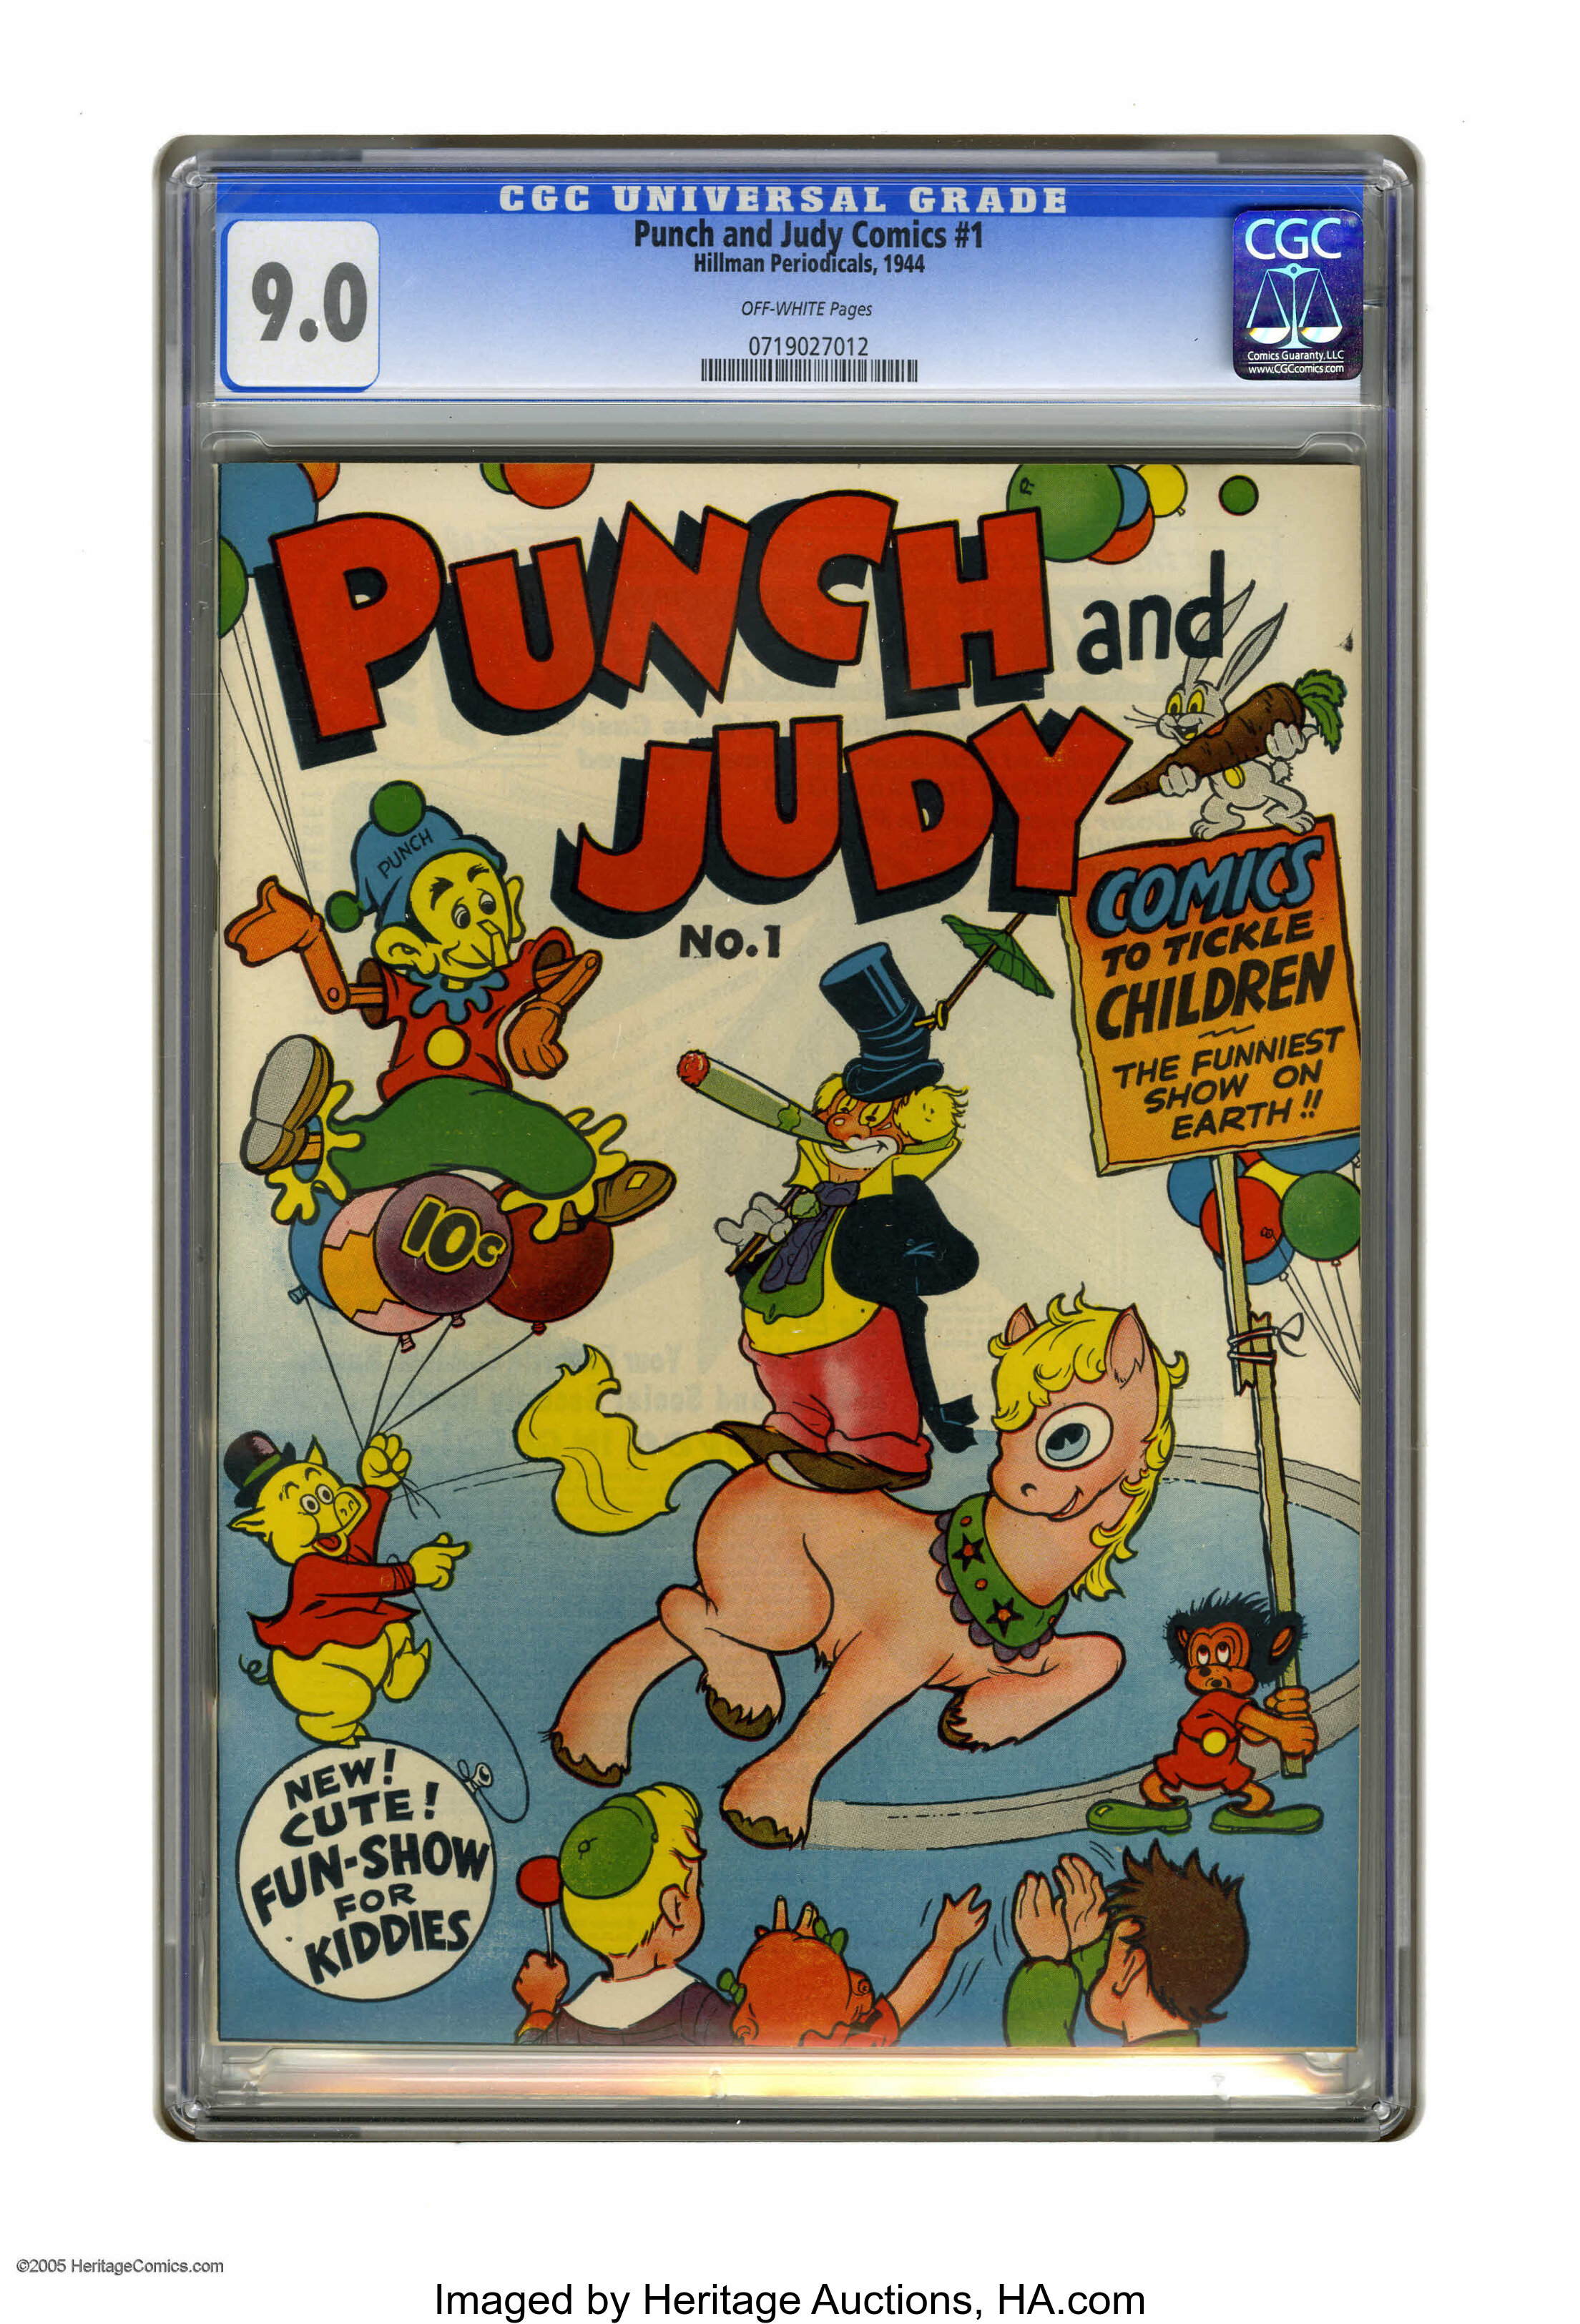 Image result for punch and judy comic book cgc